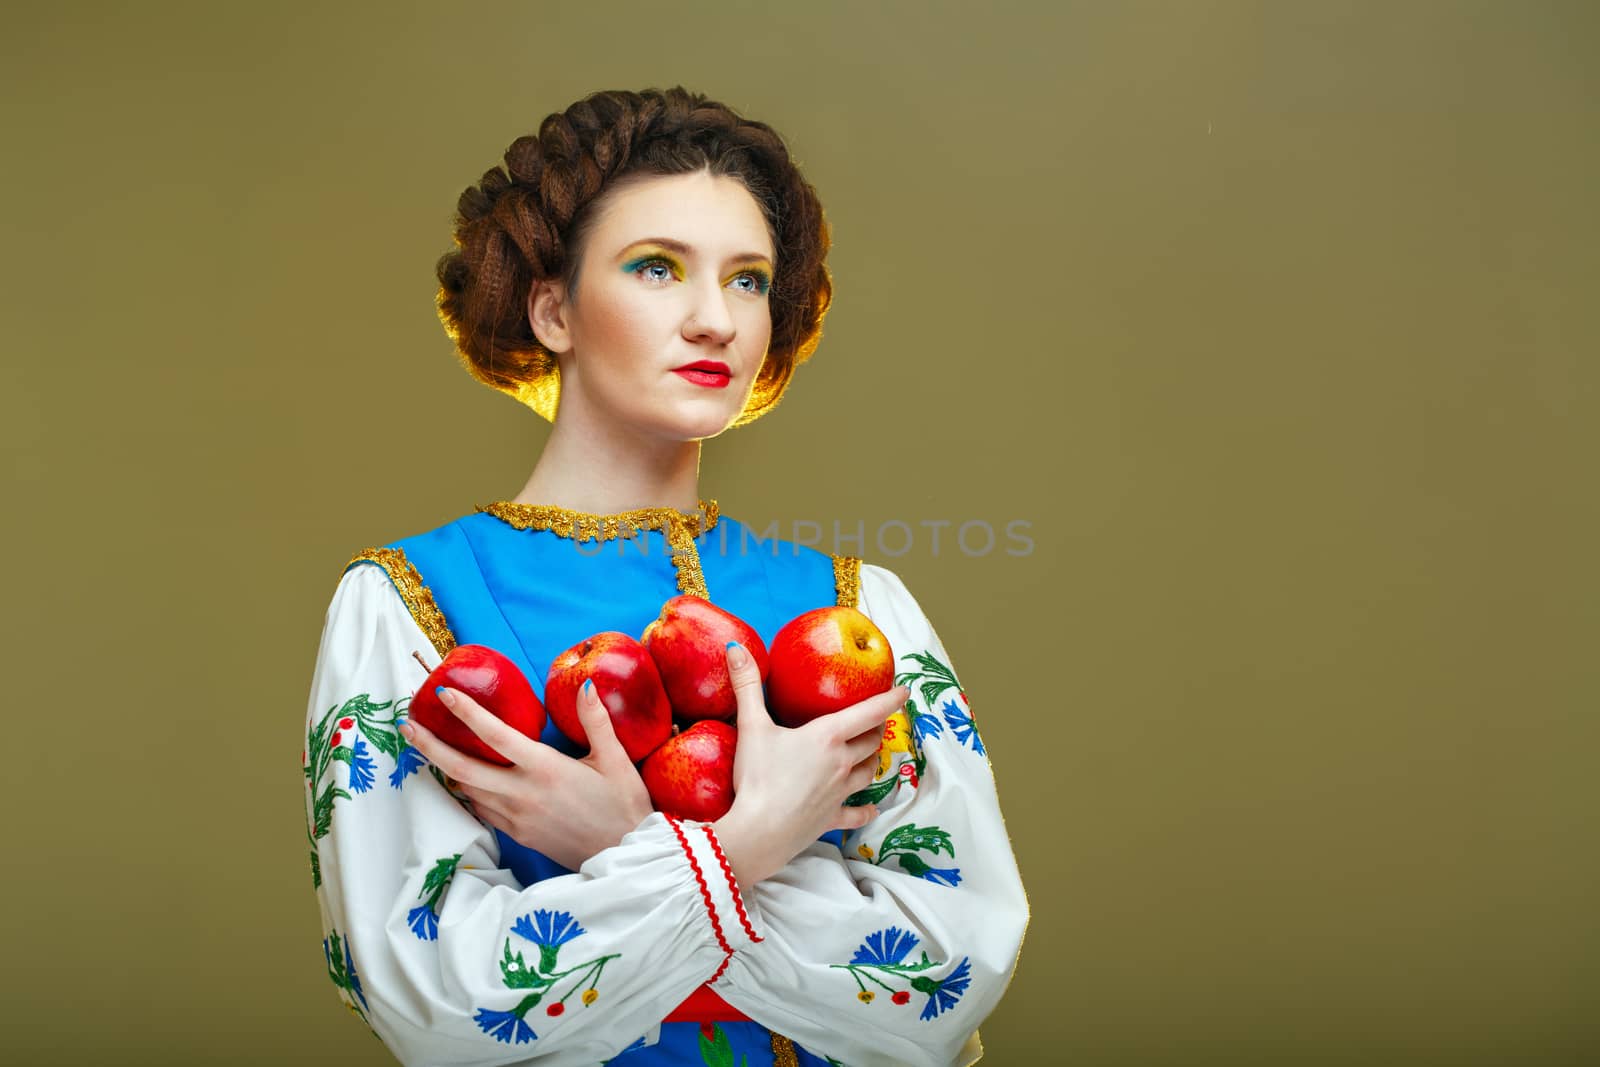 Young girl with apples by Vagengeym